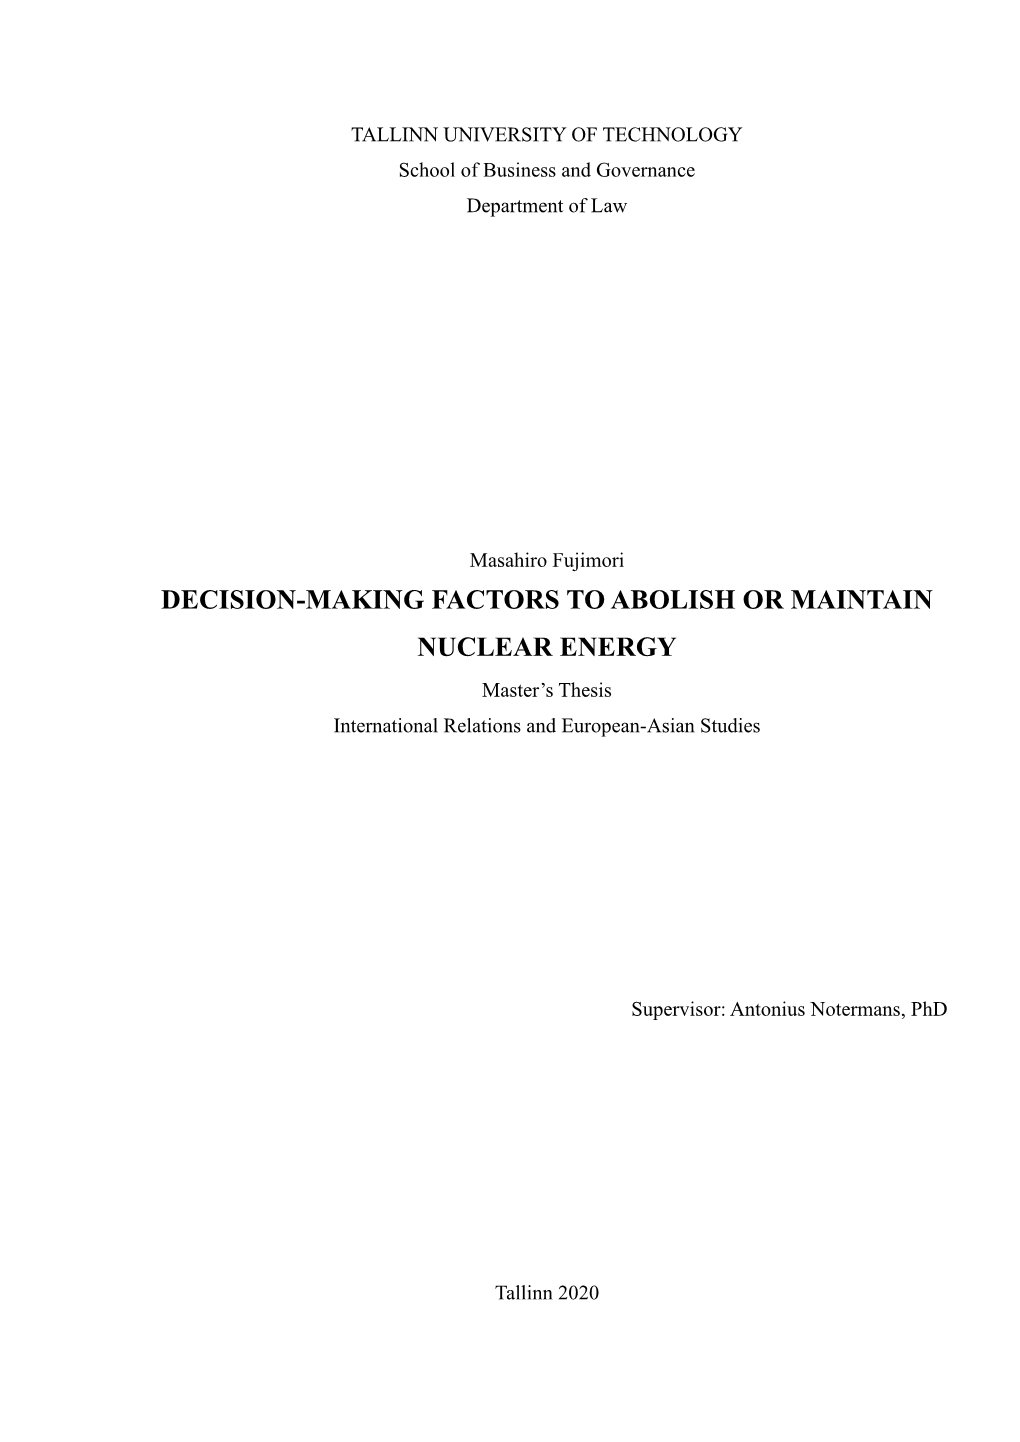 DECISION-MAKING FACTORS to ABOLISH OR MAINTAIN NUCLEAR ENERGY Master’S Thesis International Relations and European-Asian Studies